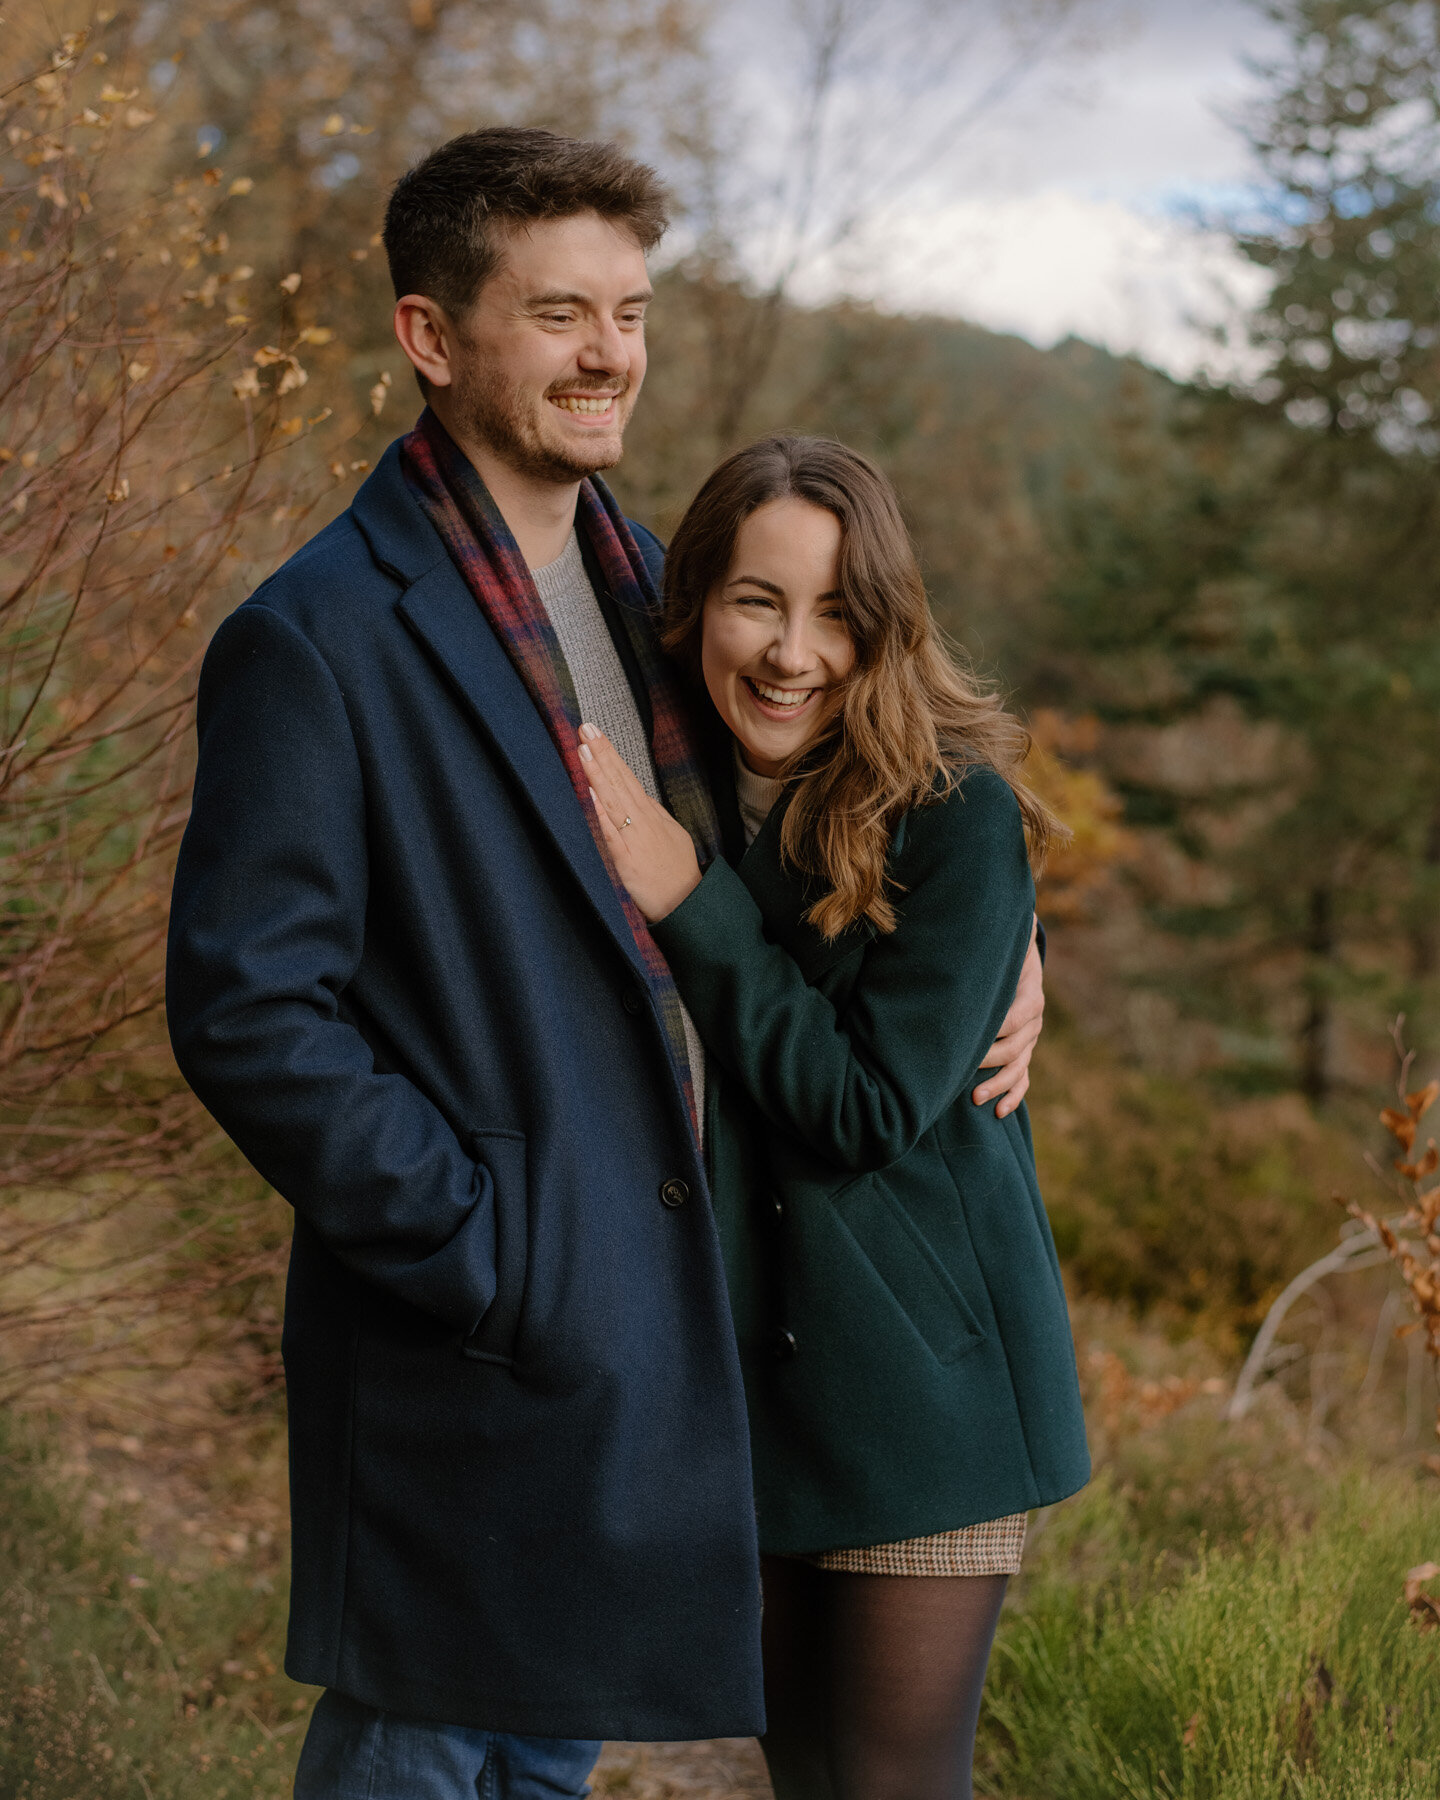 Glorious Autumnal views in Kenmore with Jen &amp; Rory who brought me to the very spot where Rory popped the question last year. Very excited to join these two next year for their wedding!